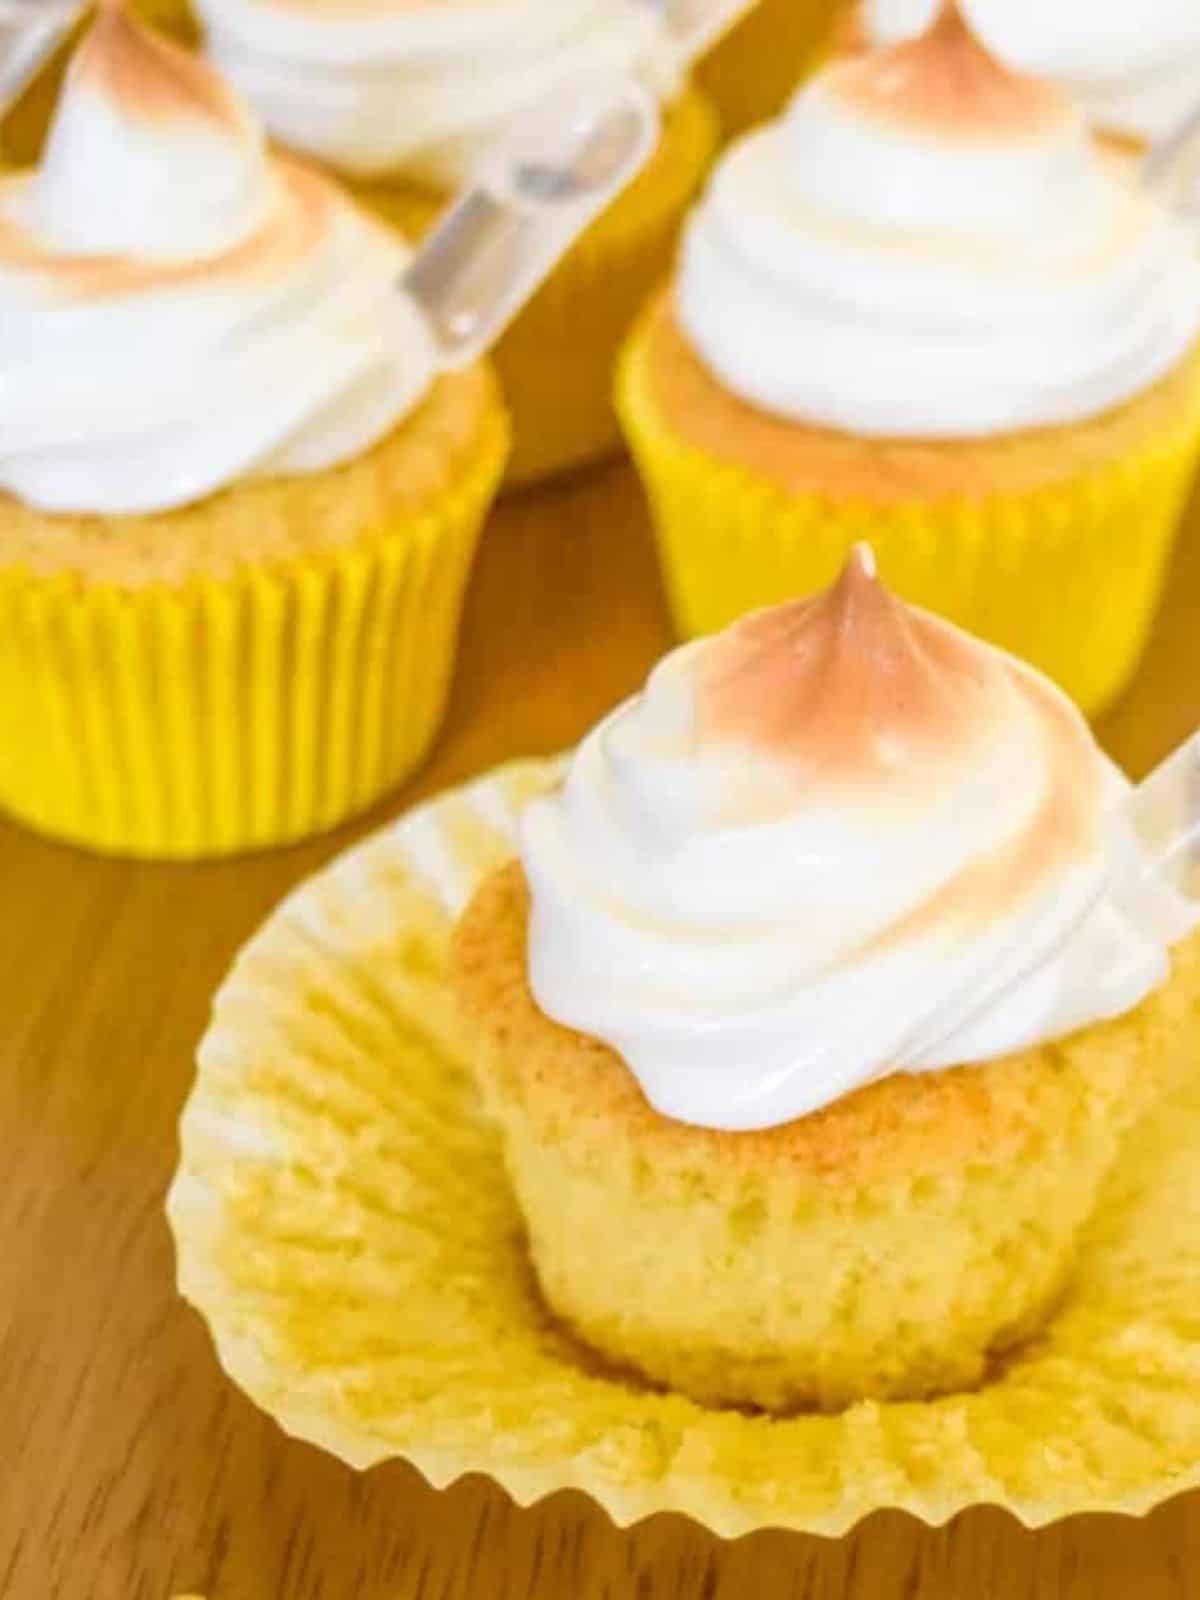 Lime pisco cupcakes with lime curd filling, Pisco sour-filled pipettes, and meringue topping.